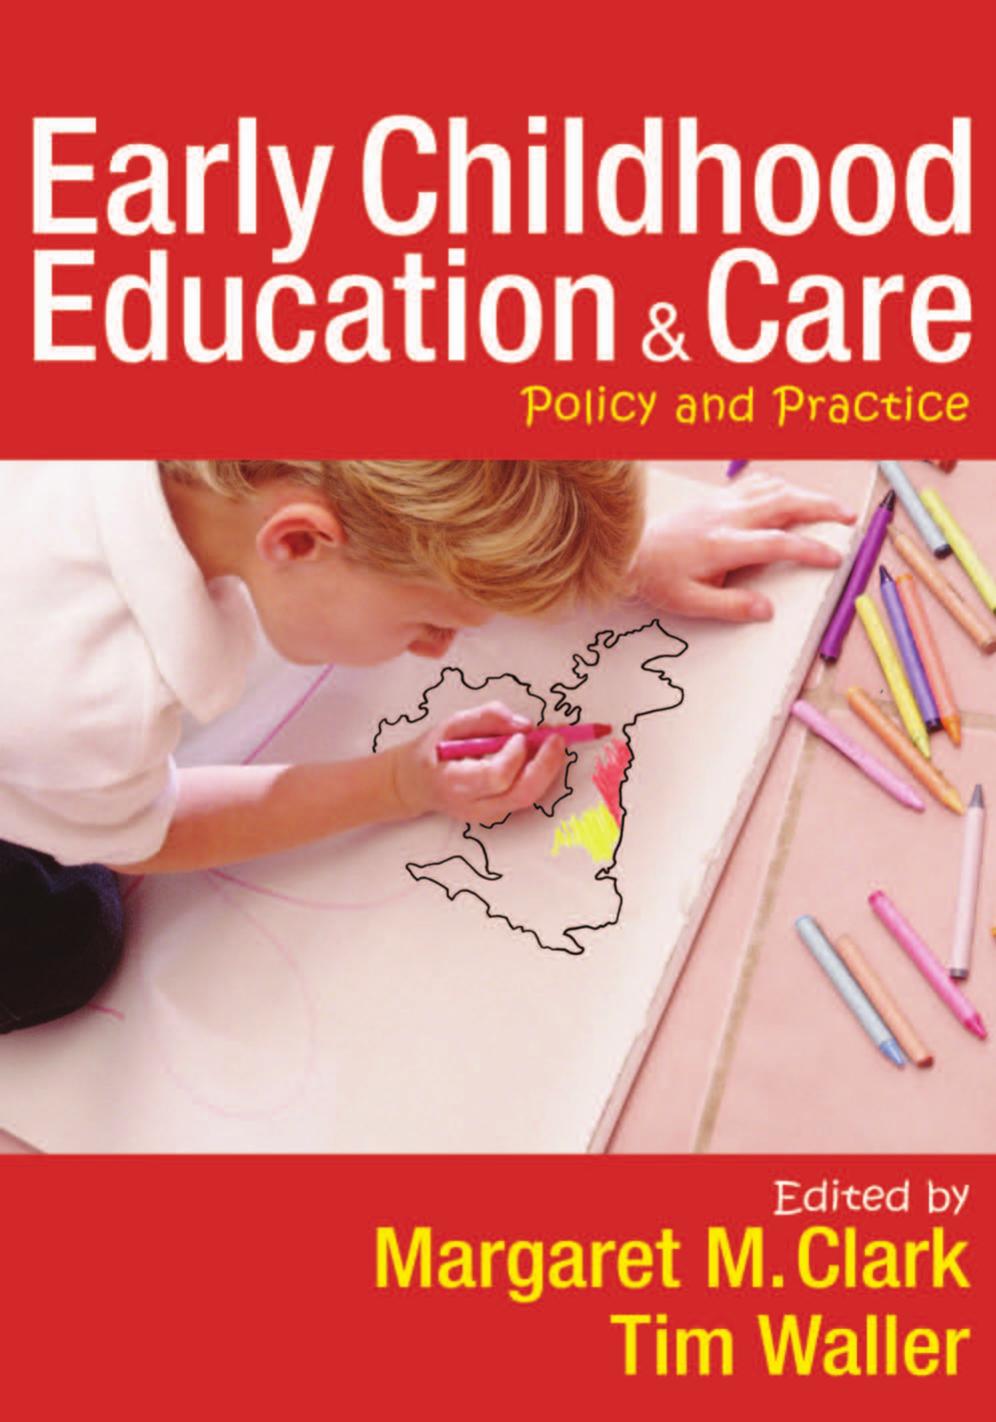 Early Childhood Education and Care Policy and Practice - Margaret Clark.jpg